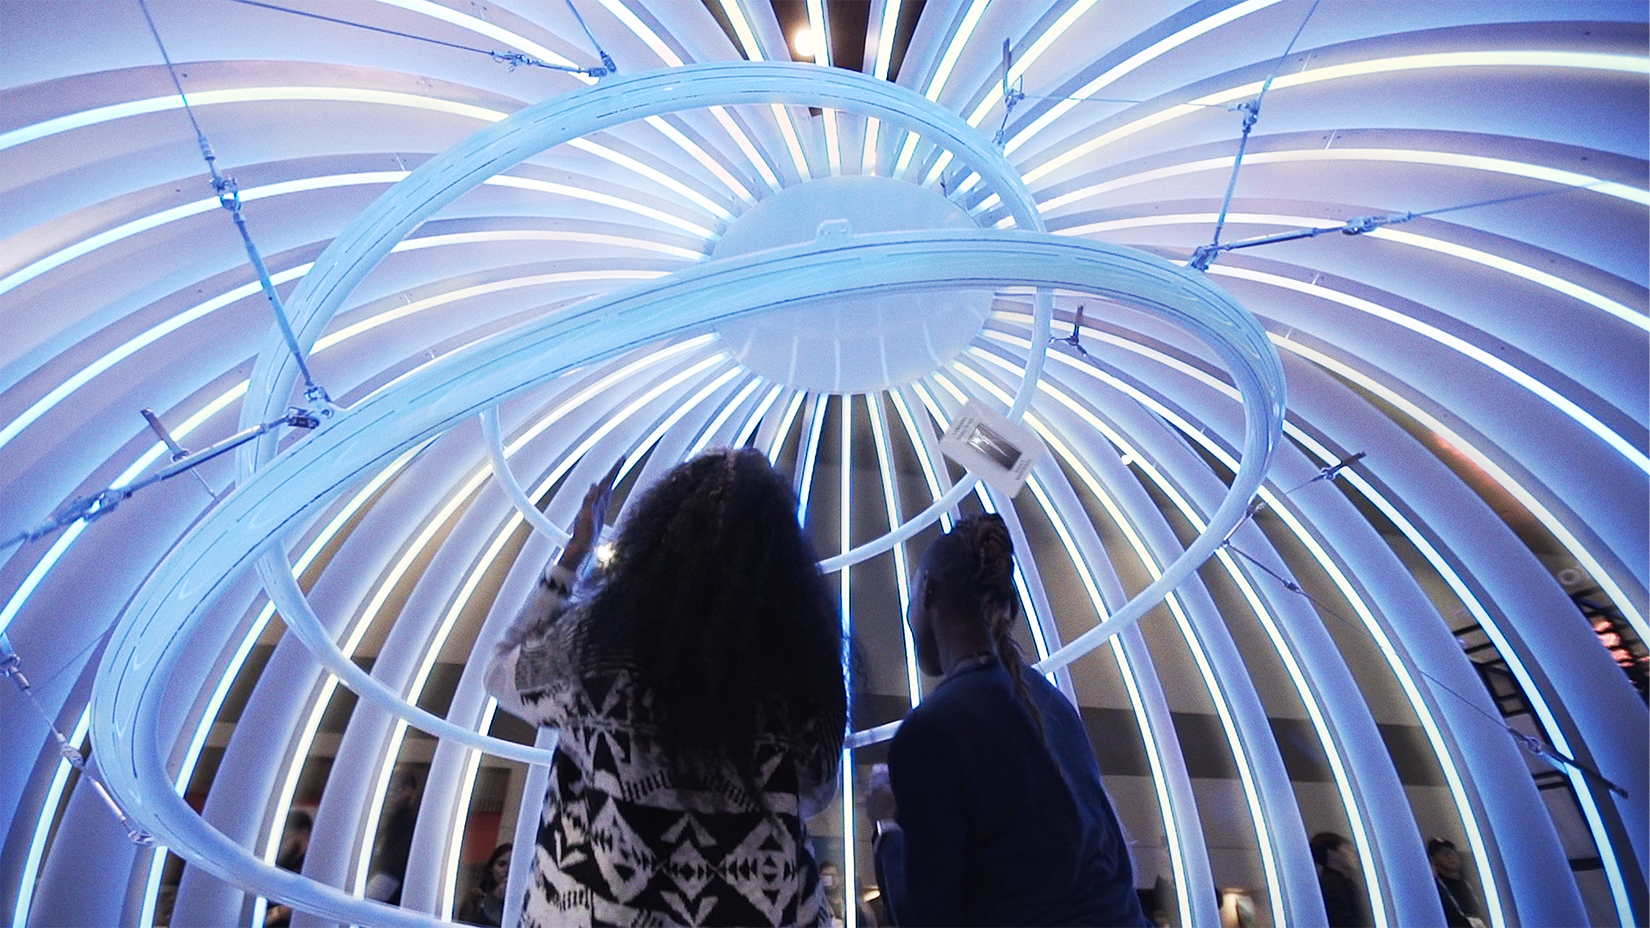 installation for Samsung of a lit orb with a camera on a spiral roller coaster